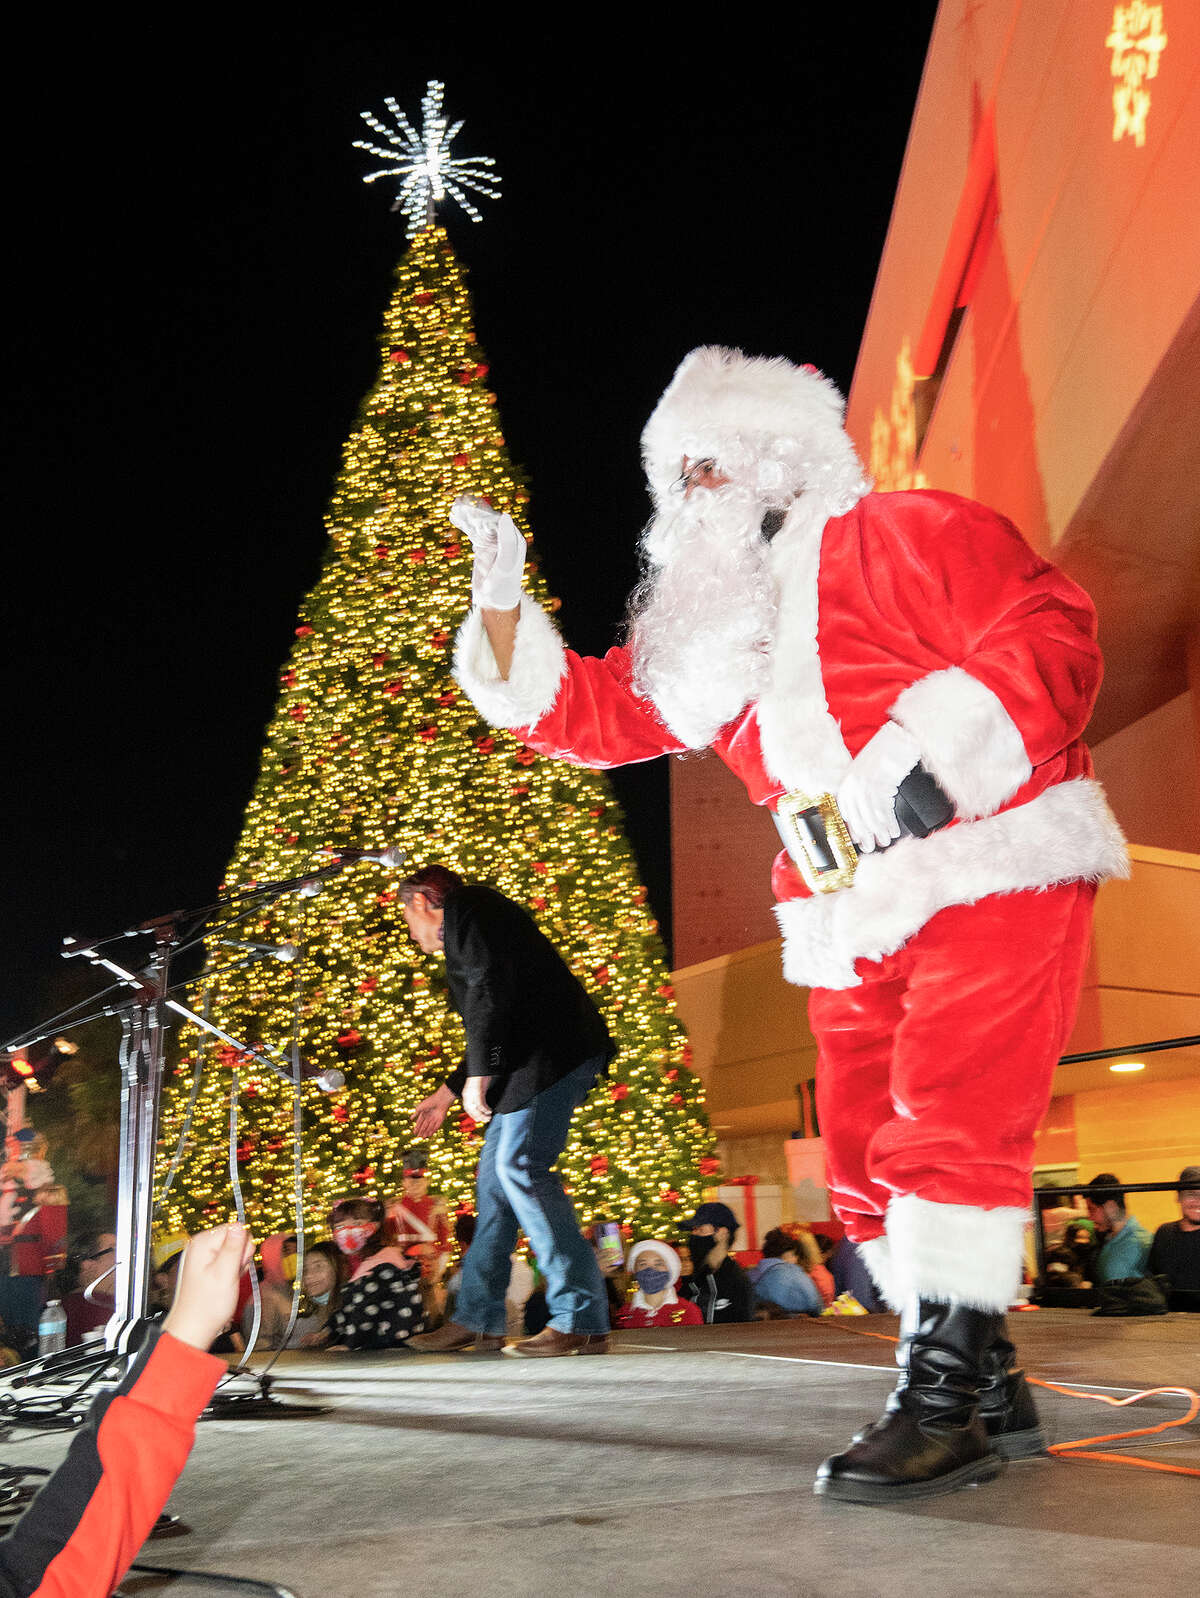 Santa Claus greets the crowd after the Christmas tree lighting on Wednesday November 1, 2021 at the Sames Auto Arena during Navidad Fest.